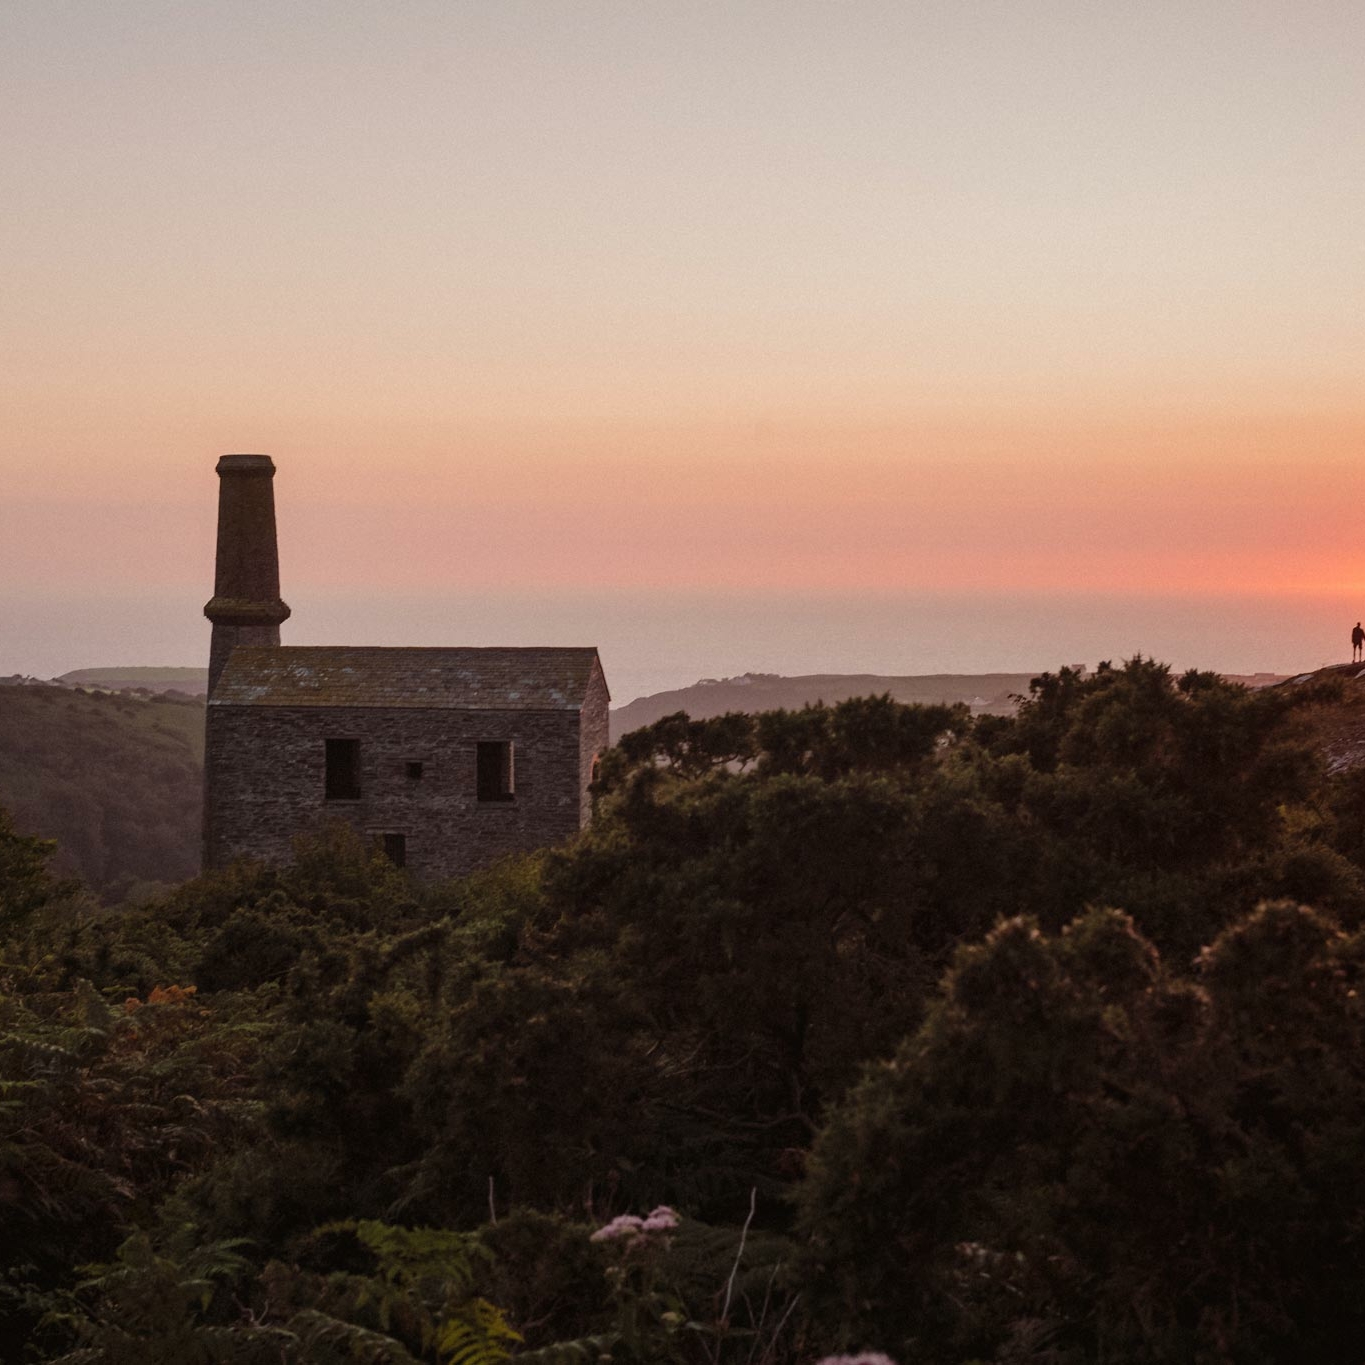 a view the Engine House at Kudhva, towards the Cornish sea and a beautiful pink sunset